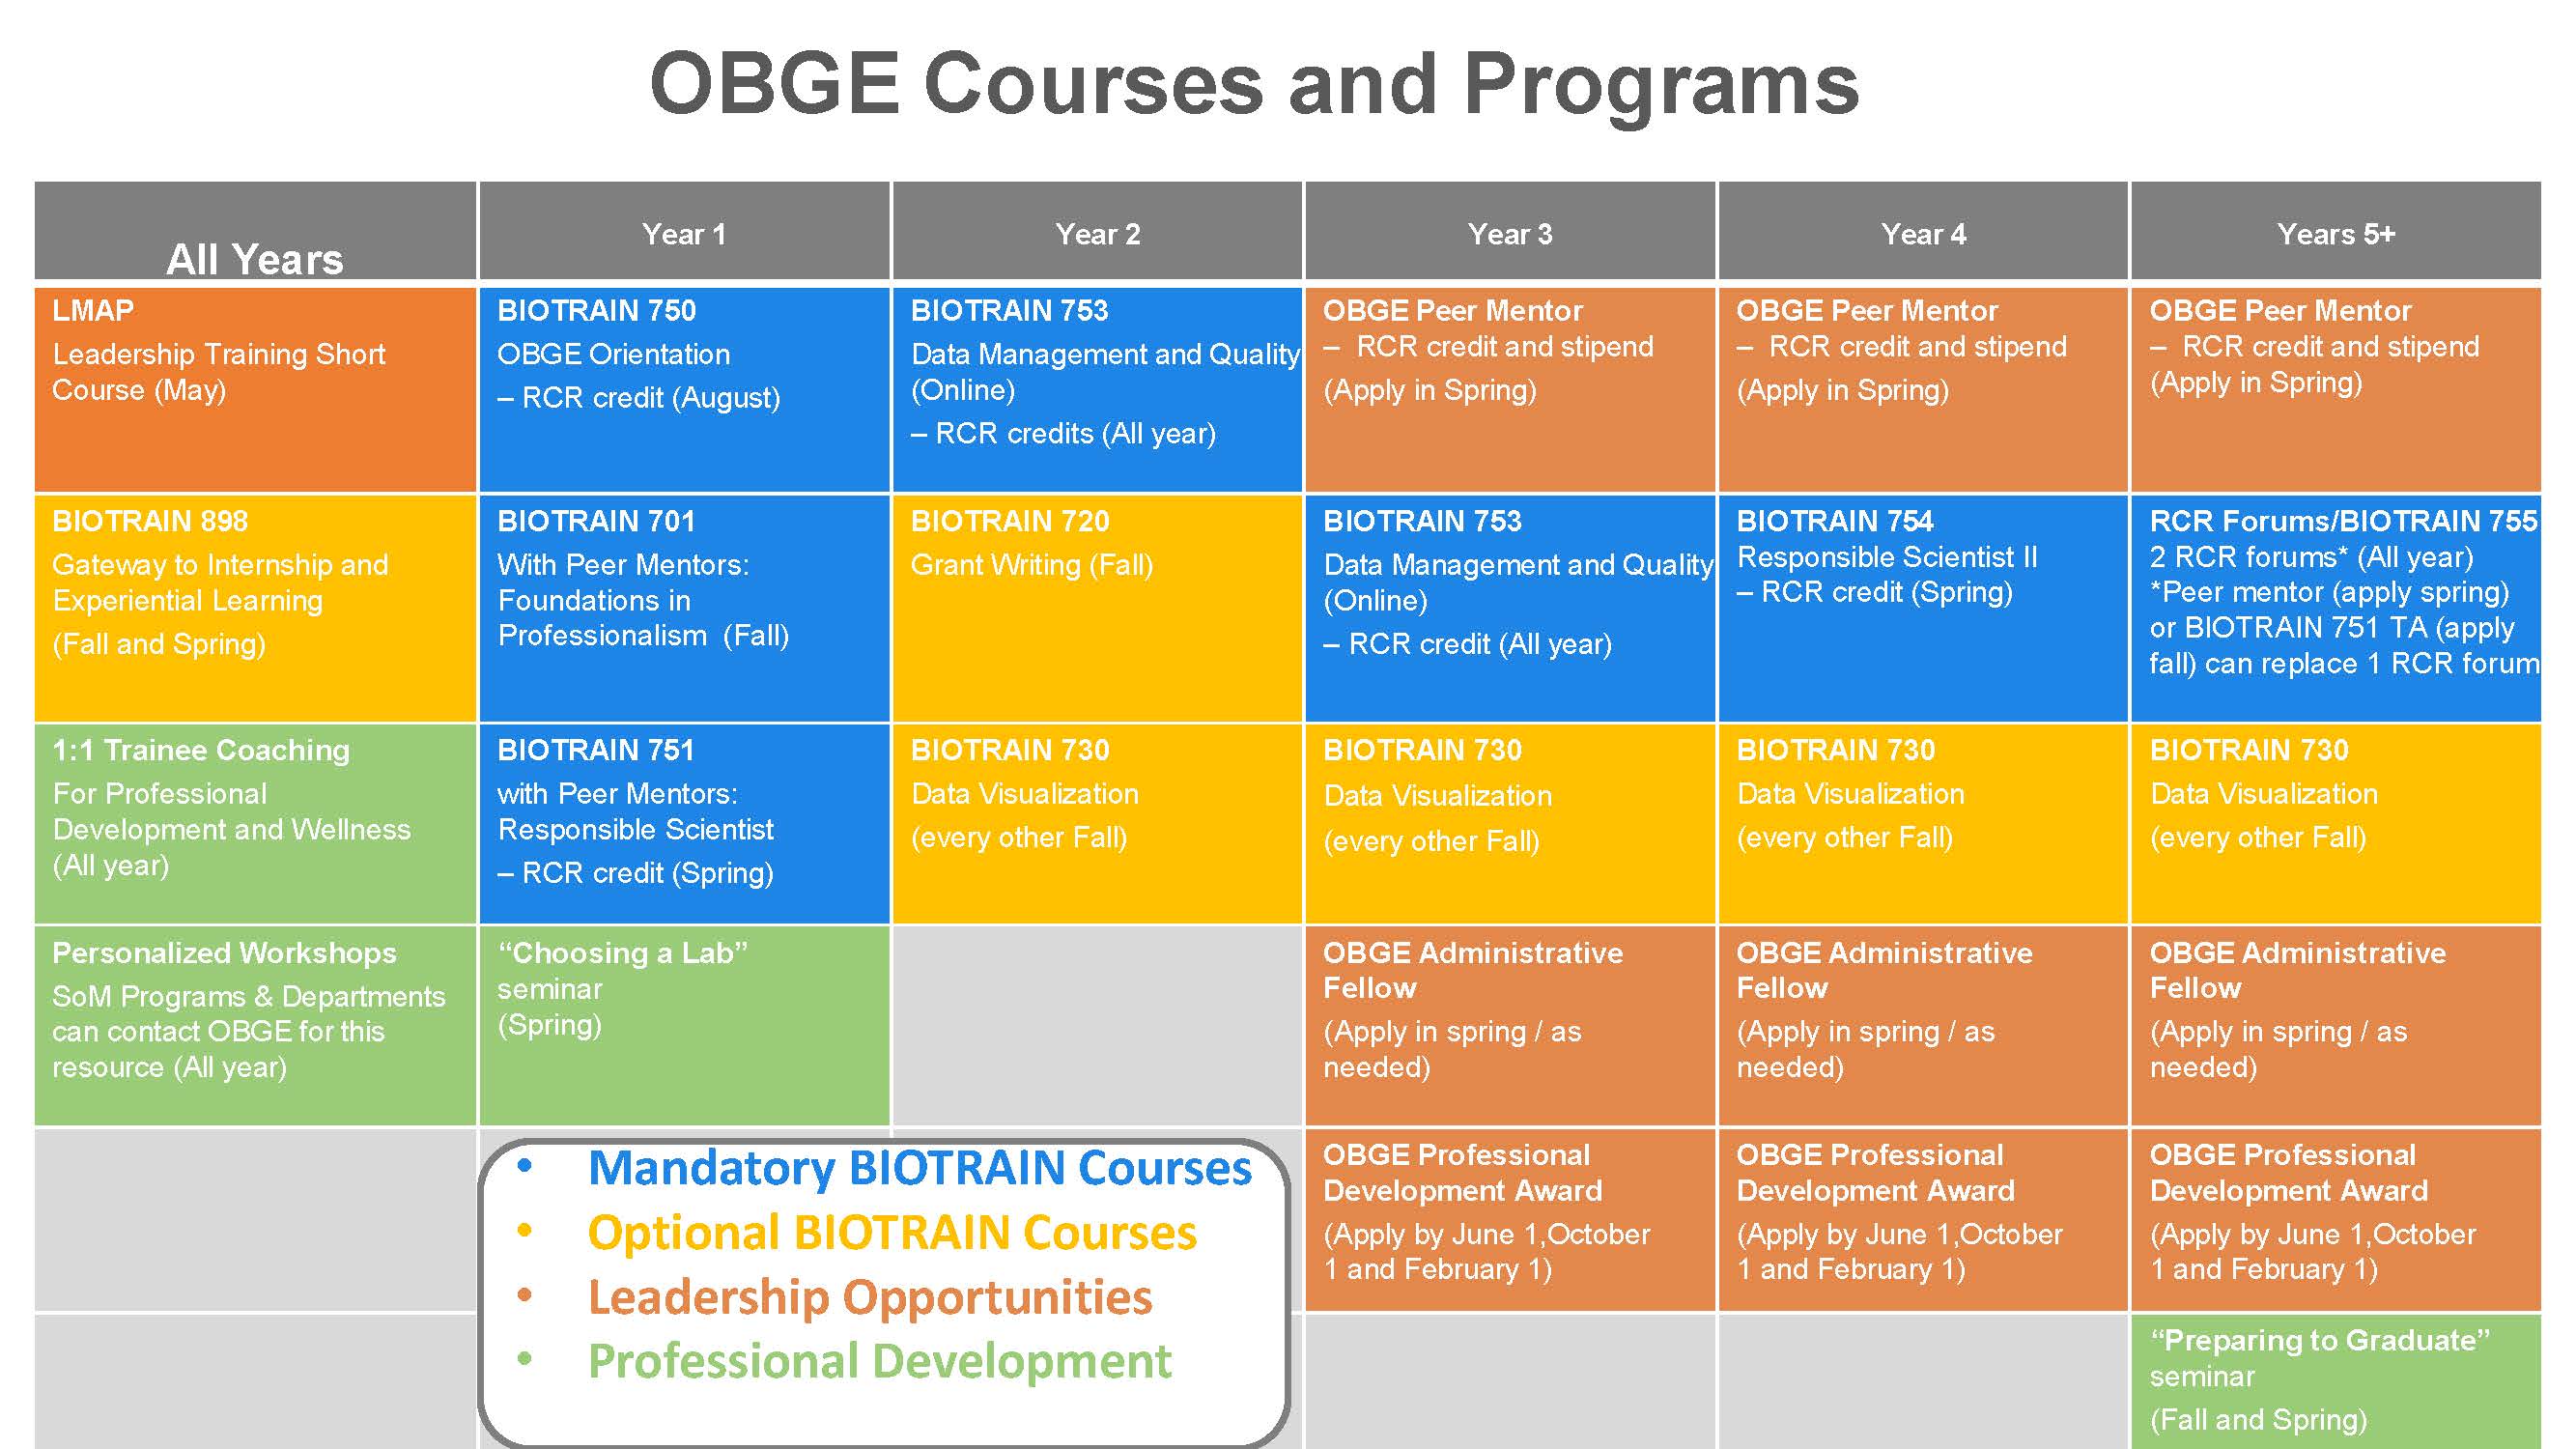 OBGE Courses and Programs